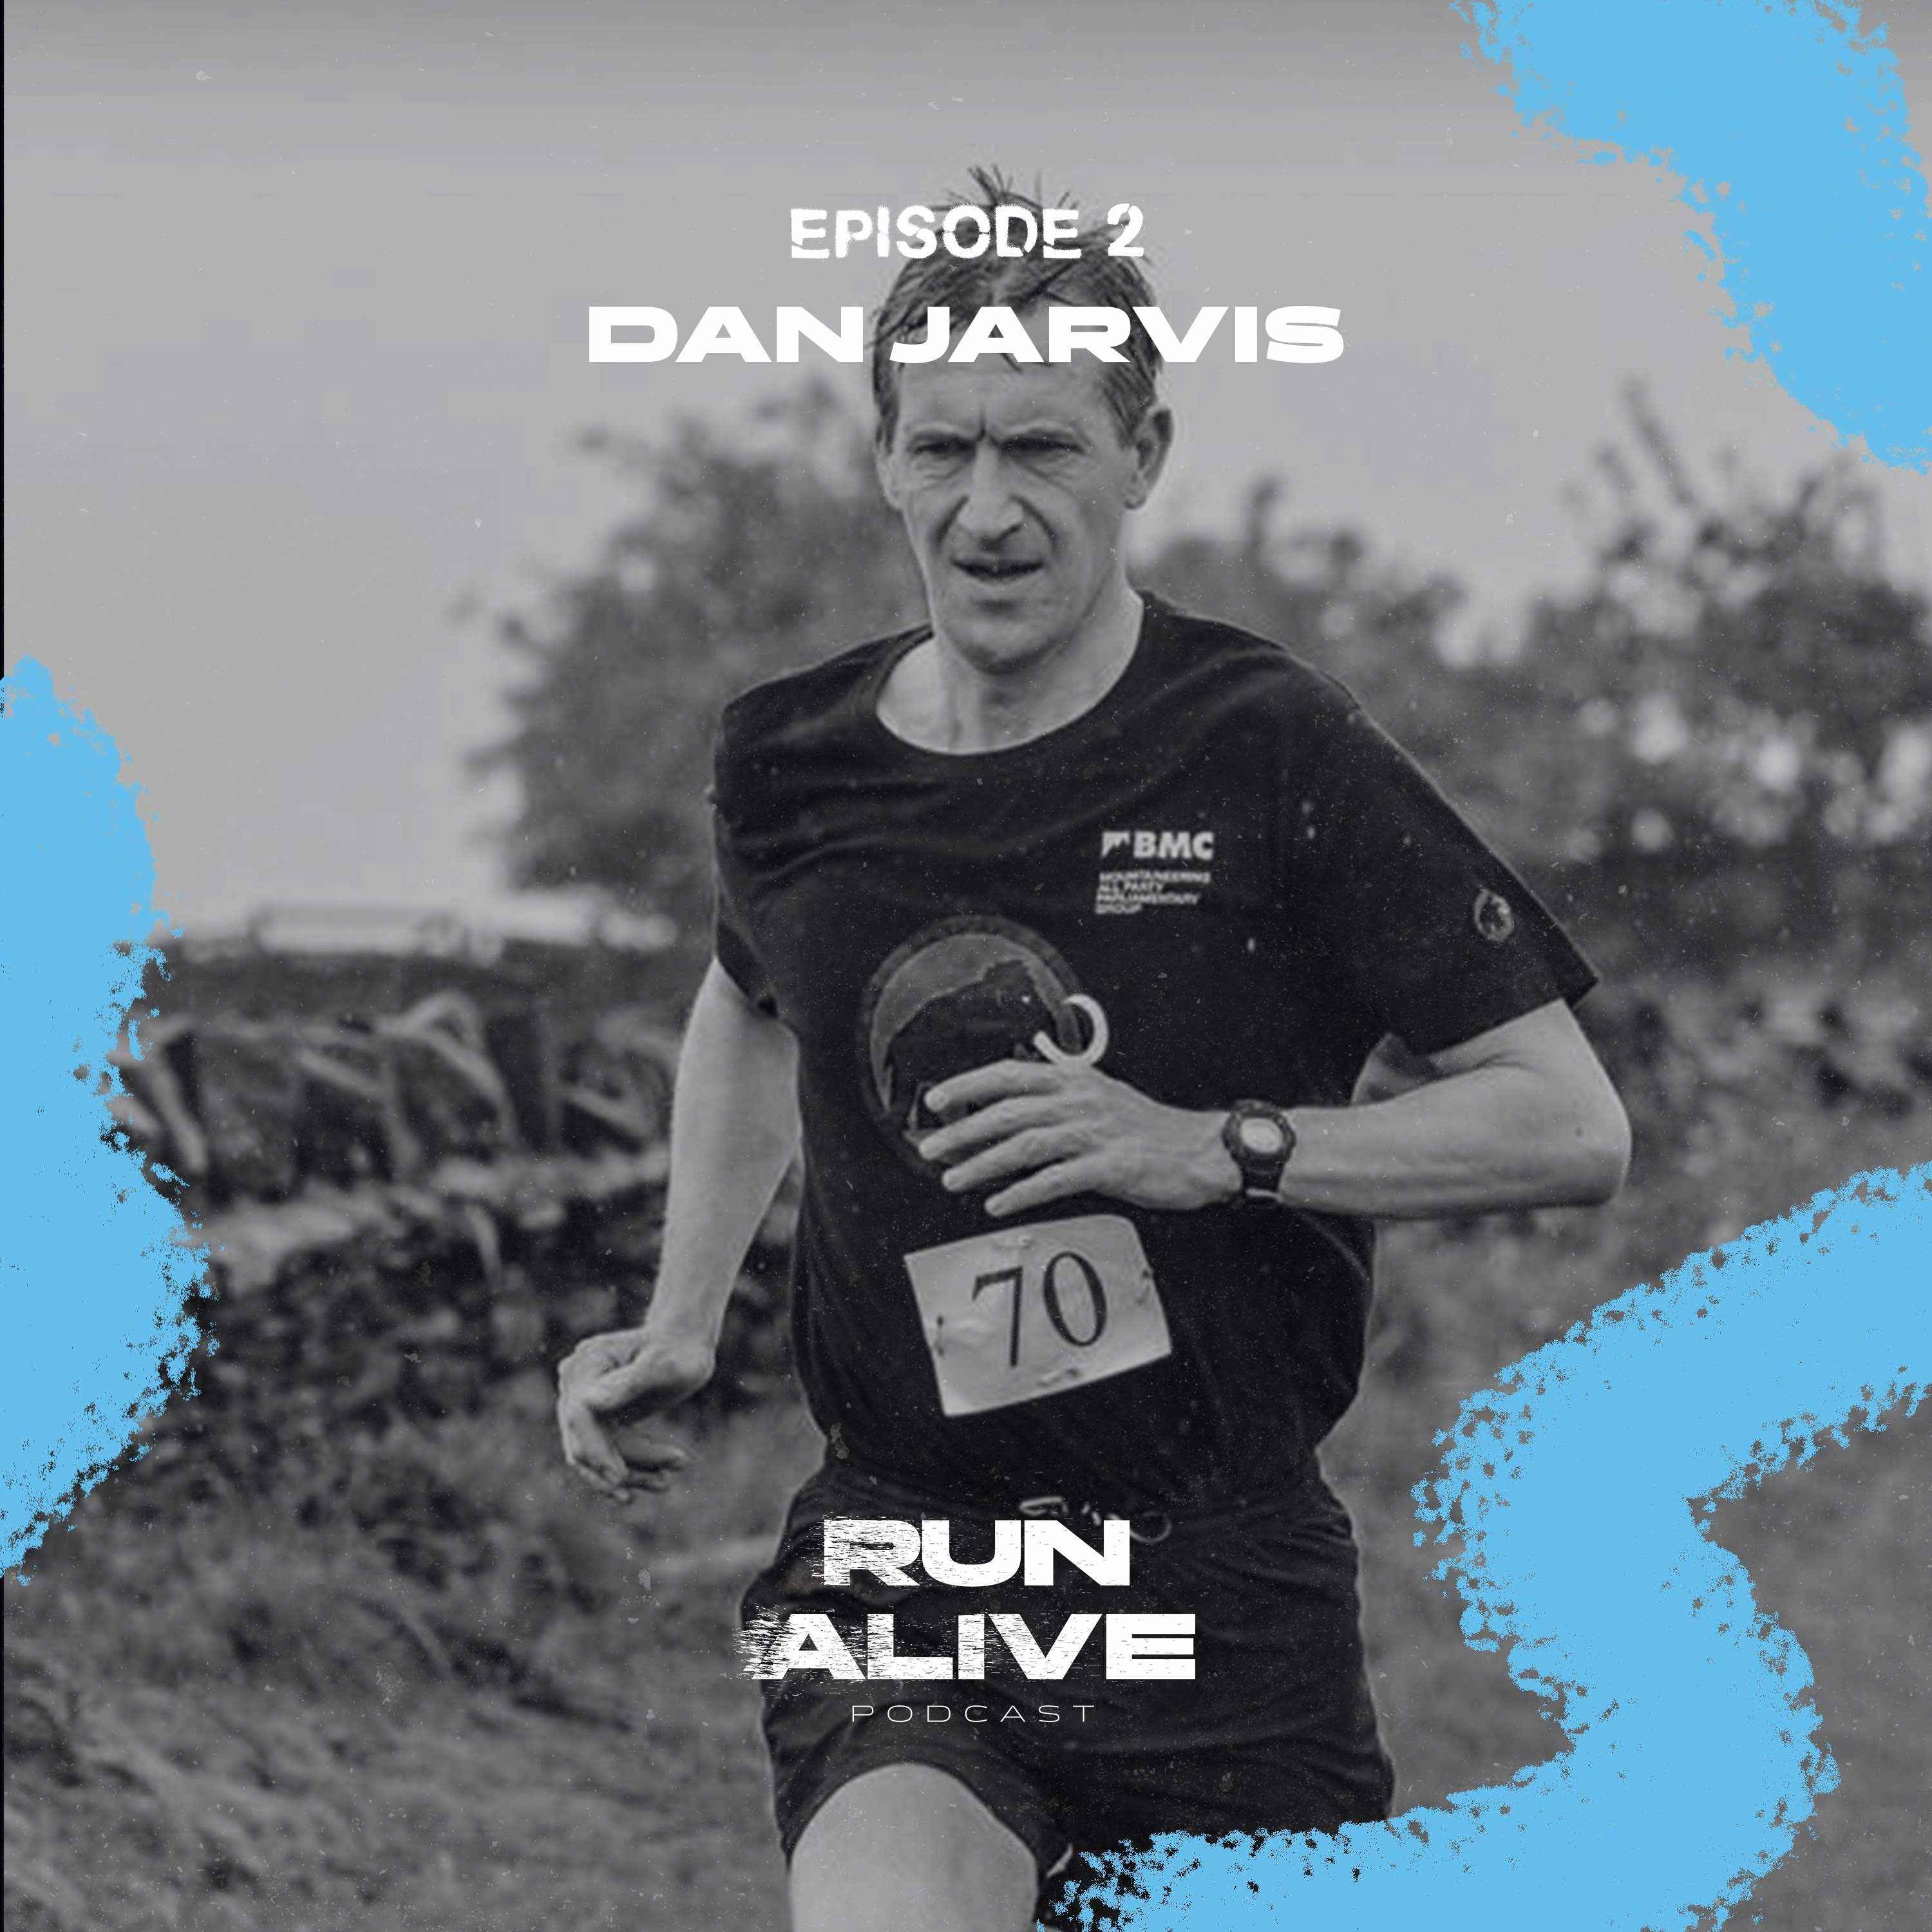 Dan Jarvis - The power of purpose for endurance and perseverance